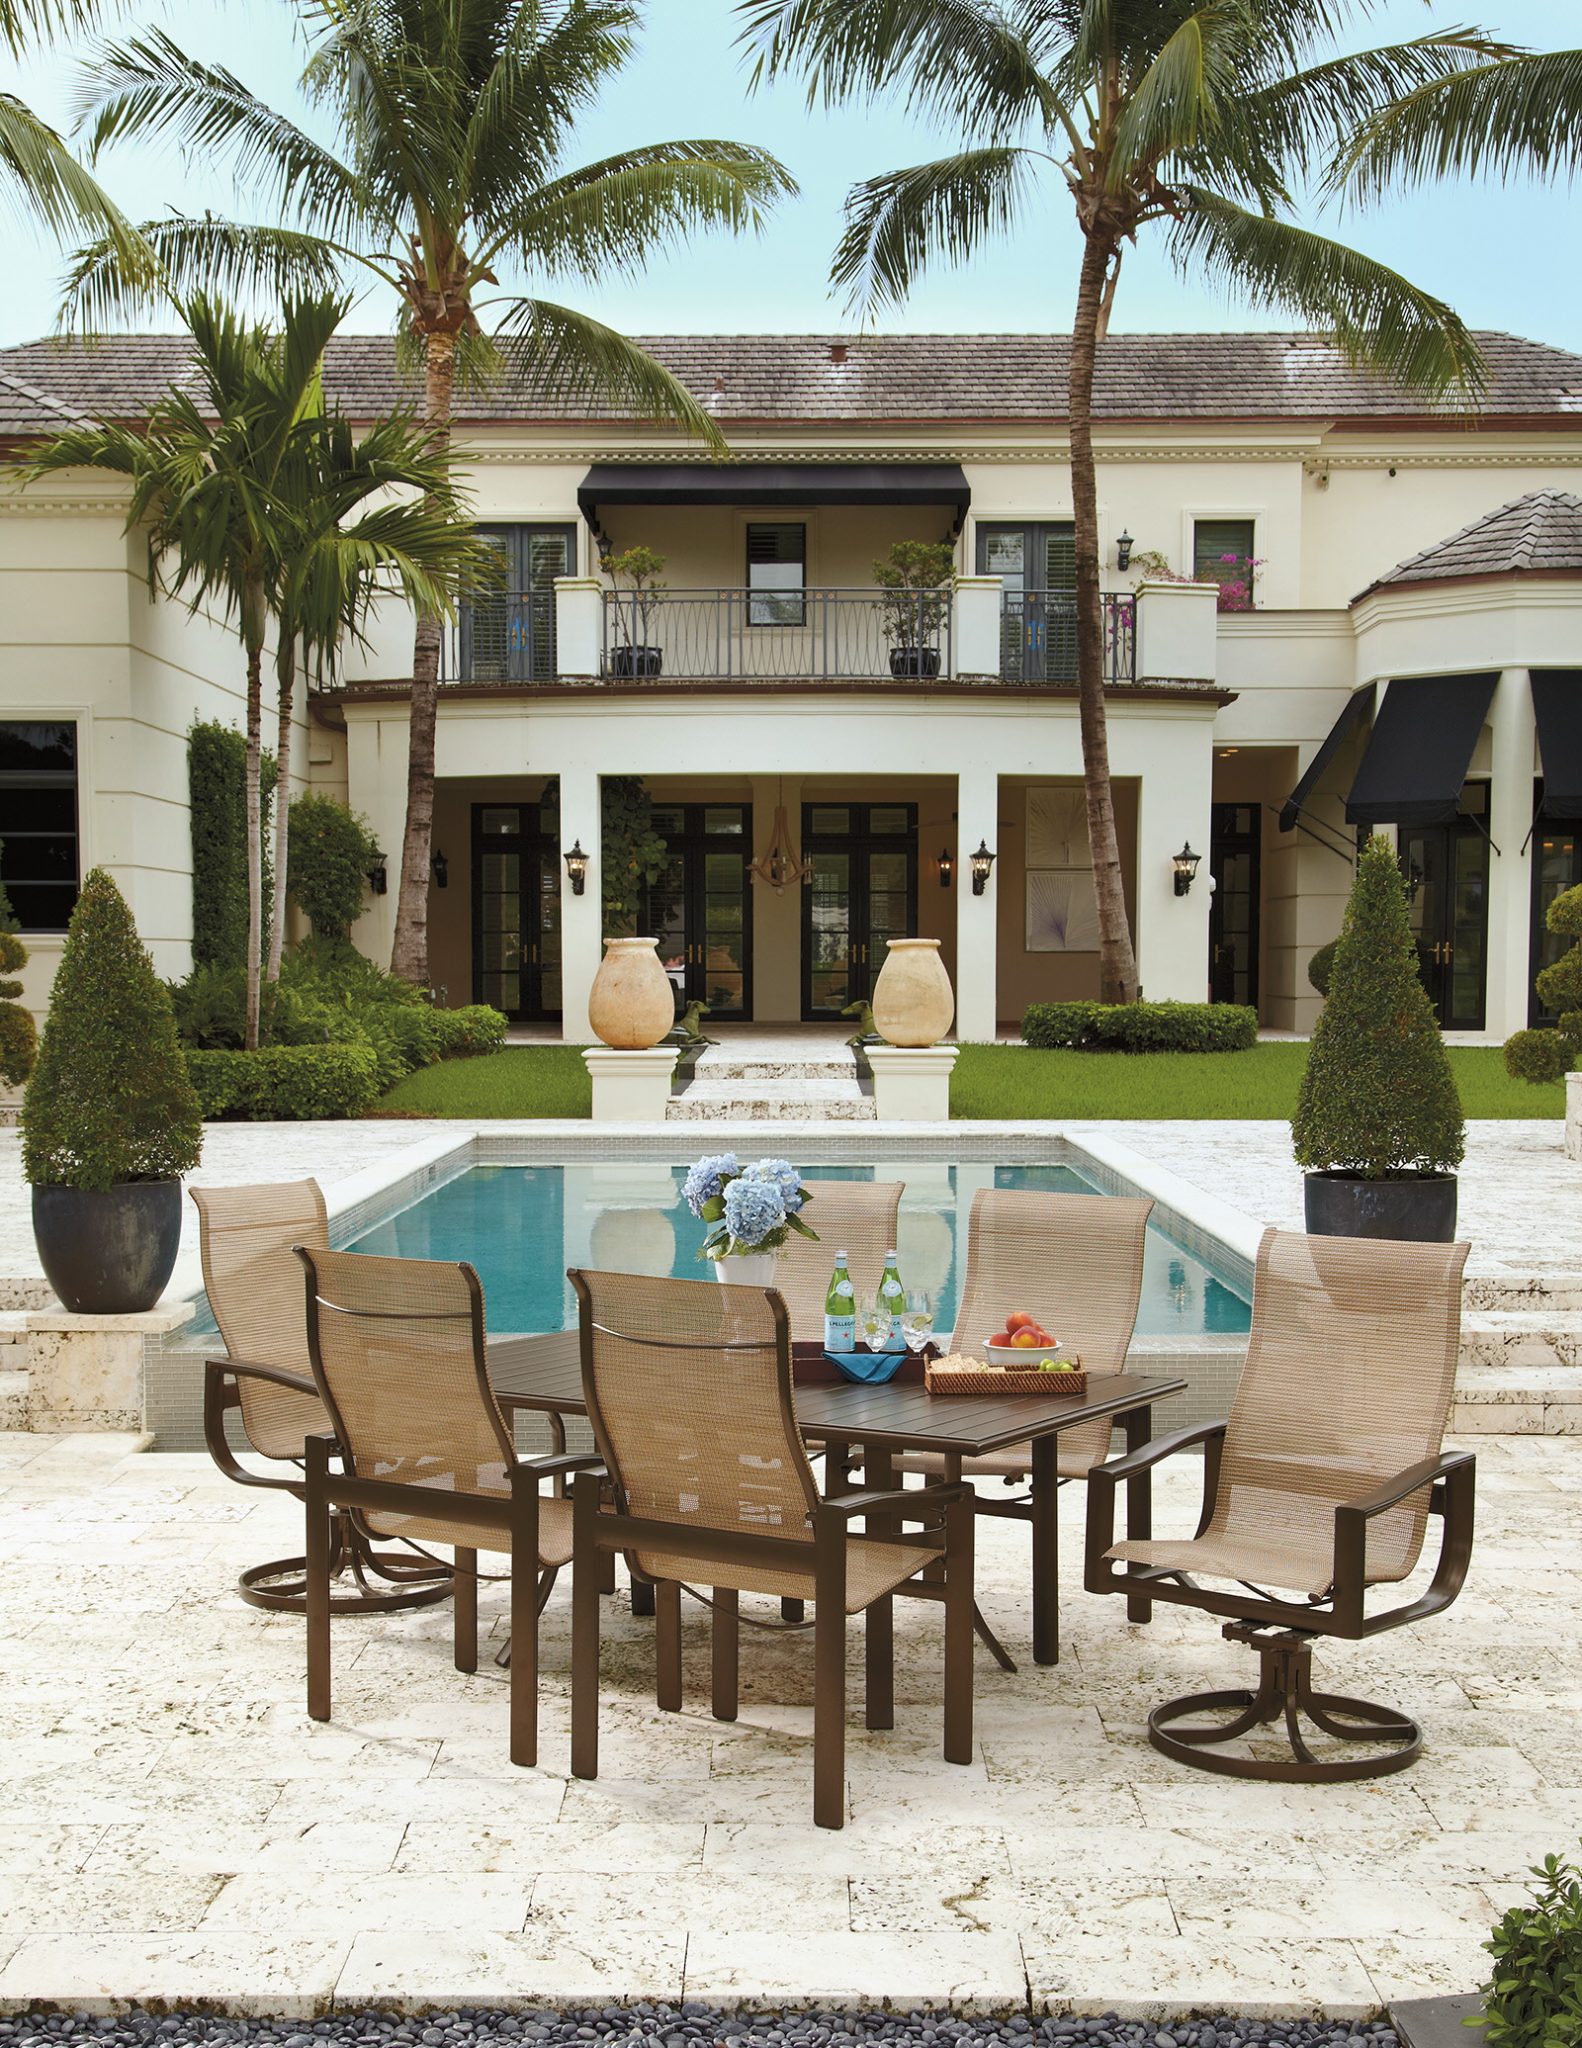 Winston Outdoor Furniture Sale Continues through March 31st Bay Breeze Patio